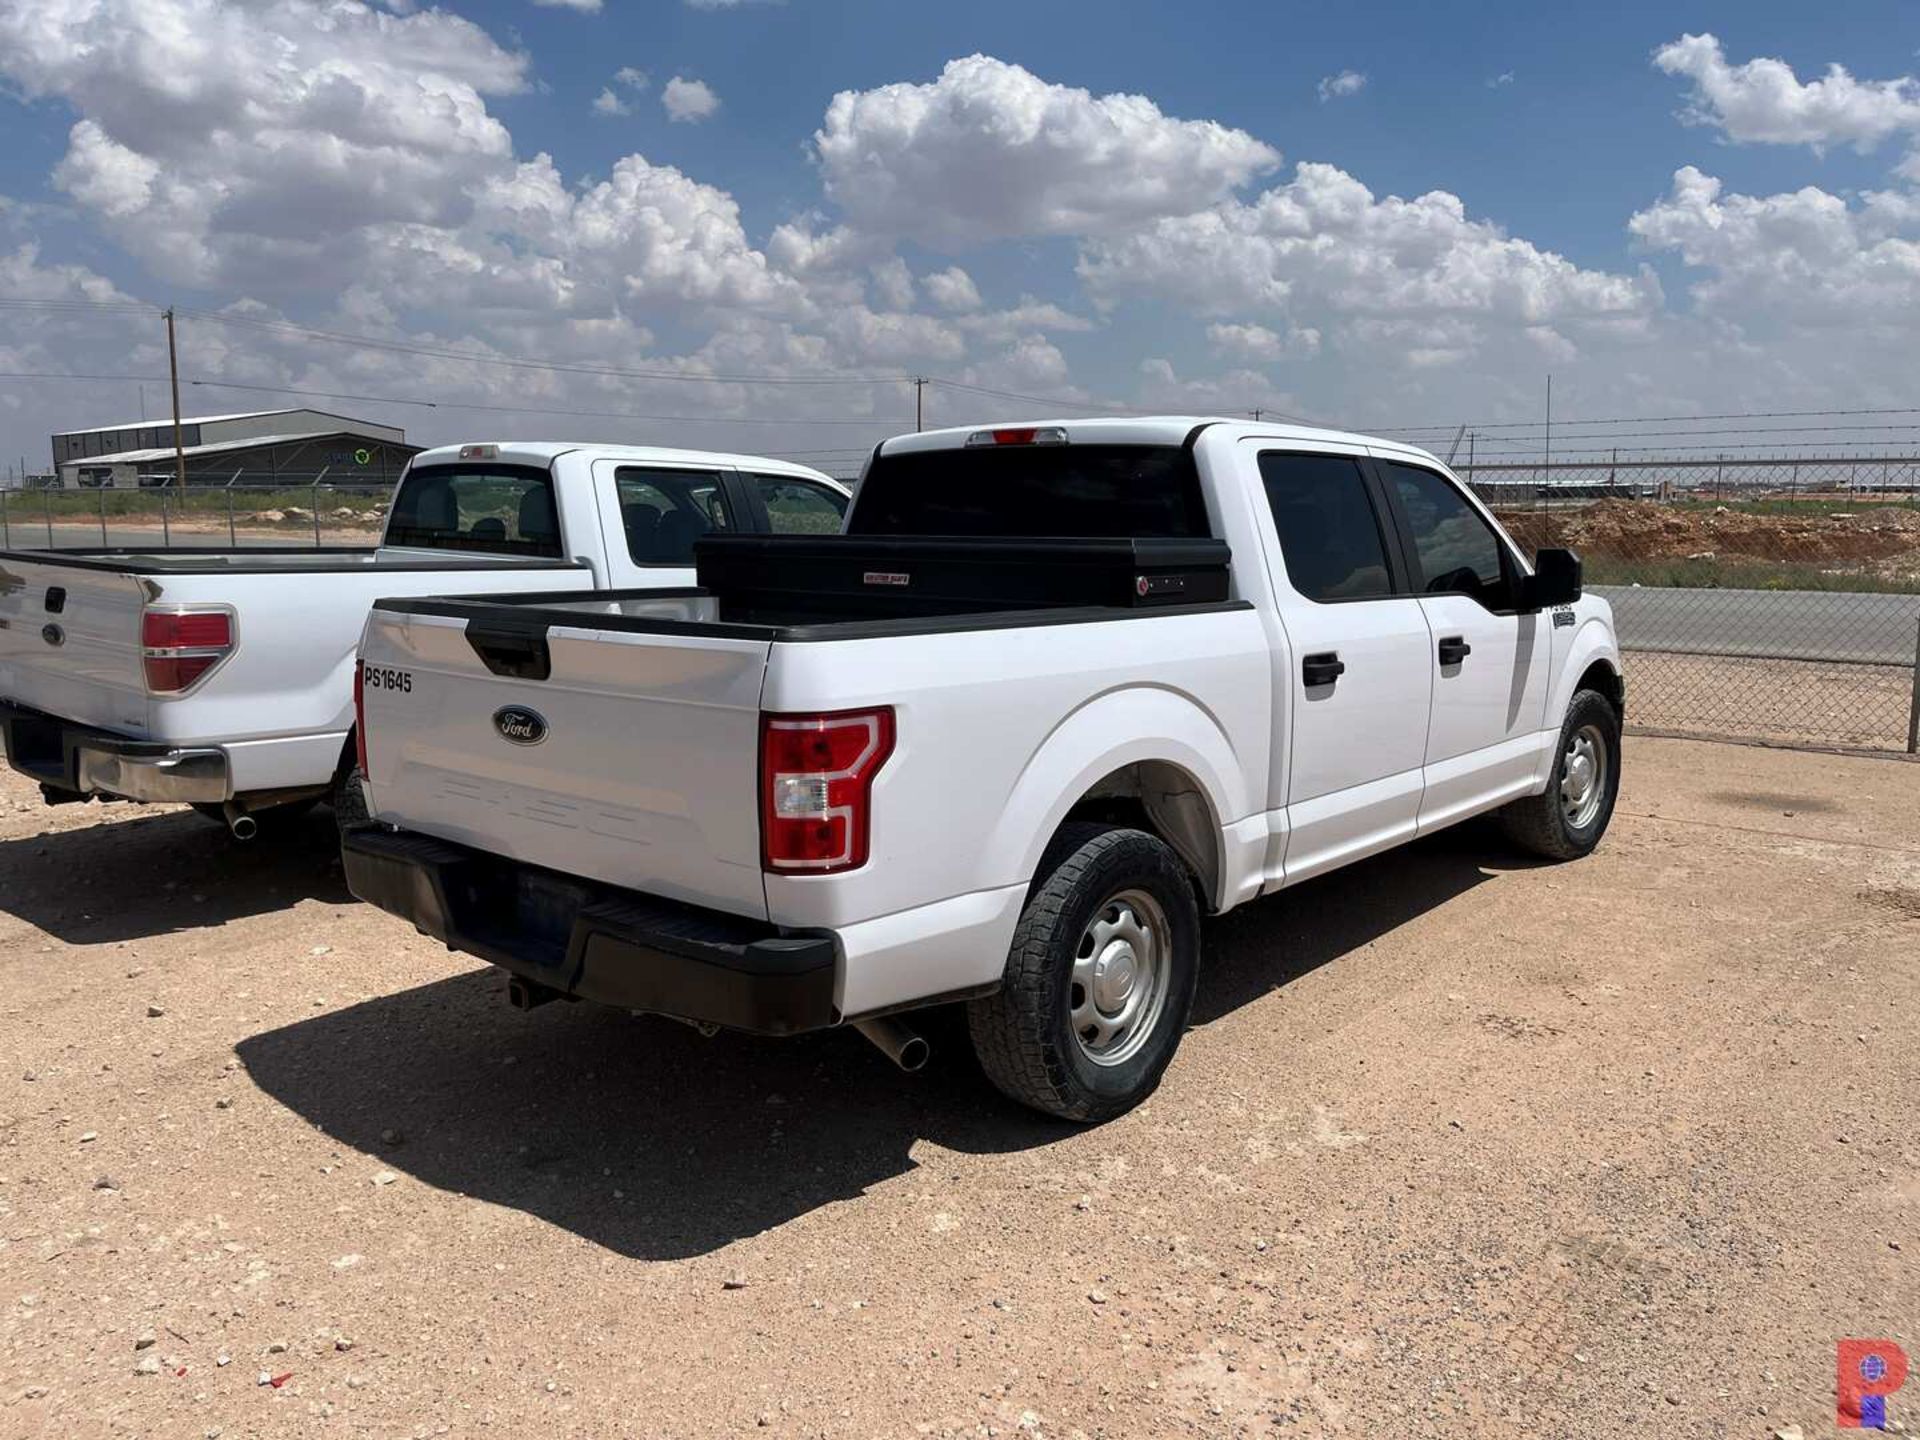 2018 FORD F-150 CREW CAB PICKUP TRUCK - Image 3 of 7